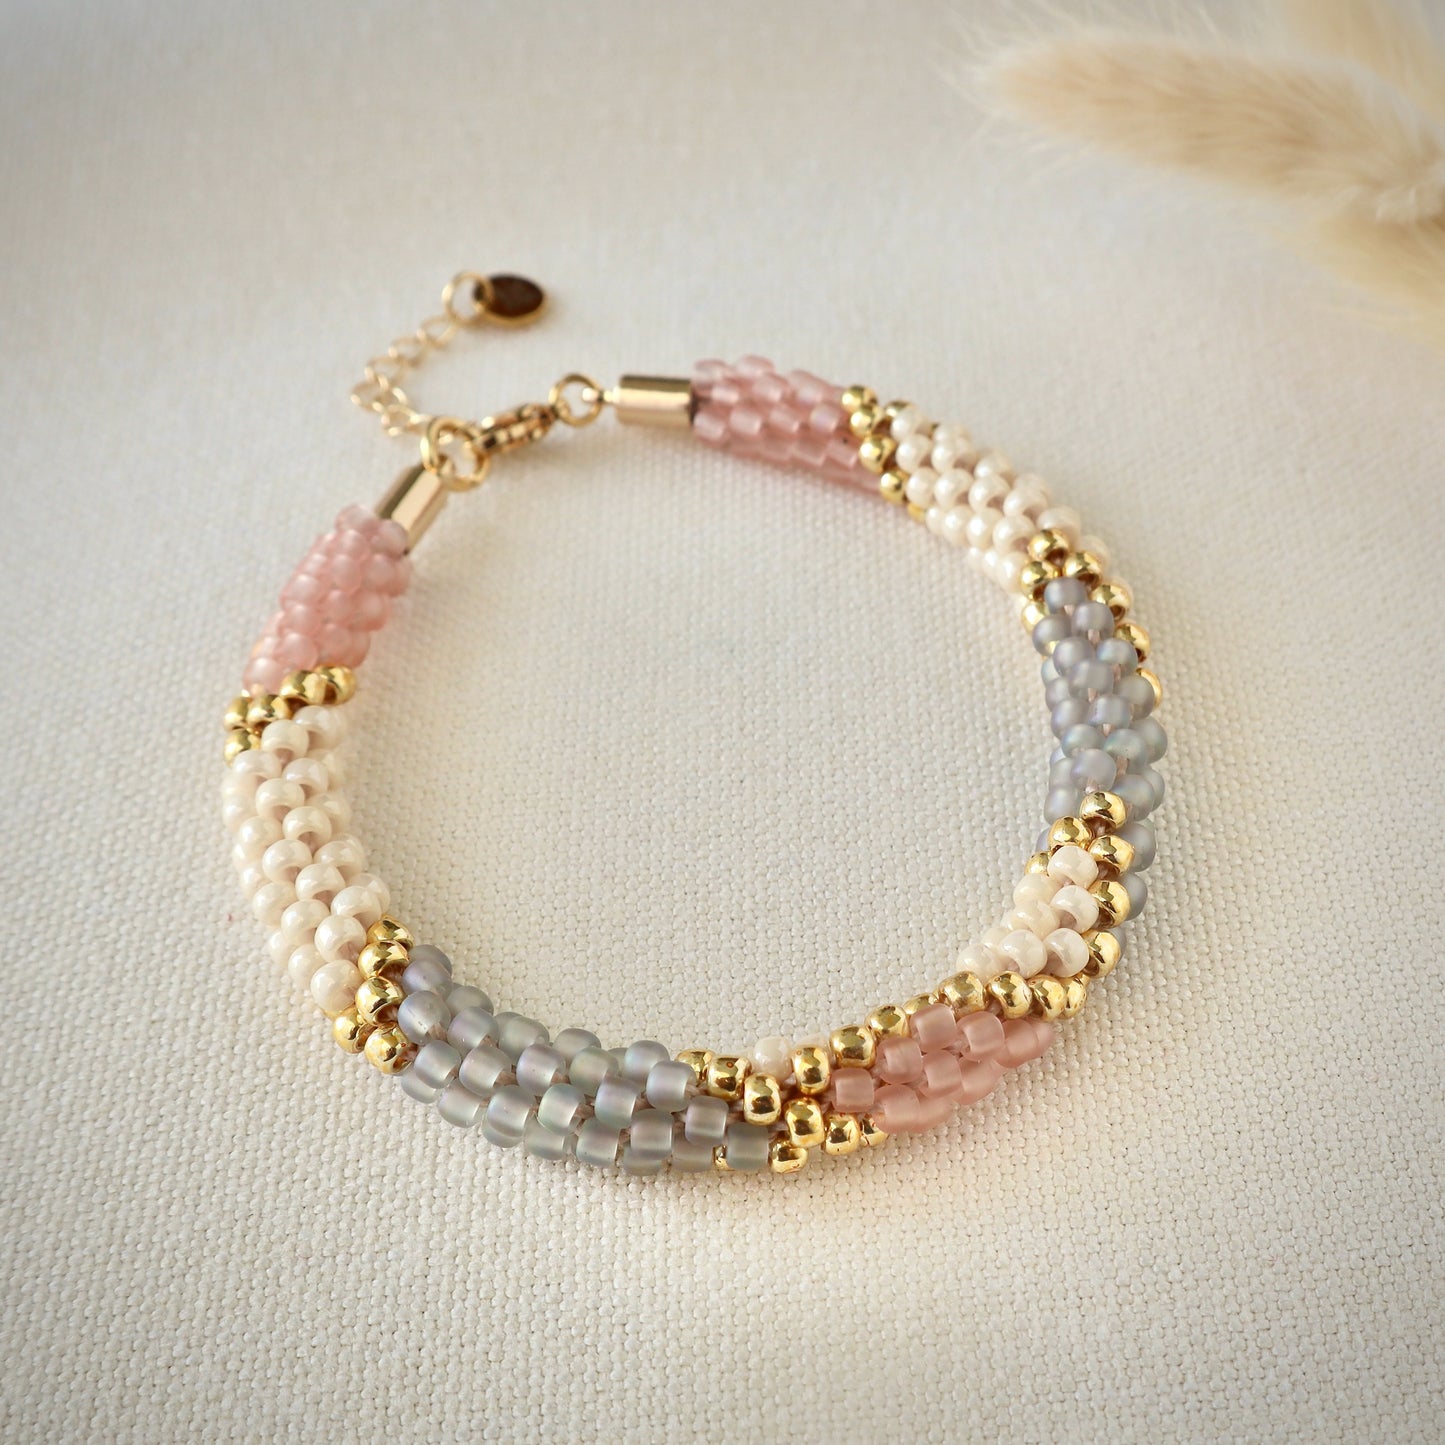 Rosy Sky Braided Bracelet - Dreamy pink, cream and blue grey colour Beaded Bracelet with gold accents. Braided Beaded Bracelet with Japanese Glass Seed Beads using the Kumihimo technique - Southeast Sparrow Jewellery